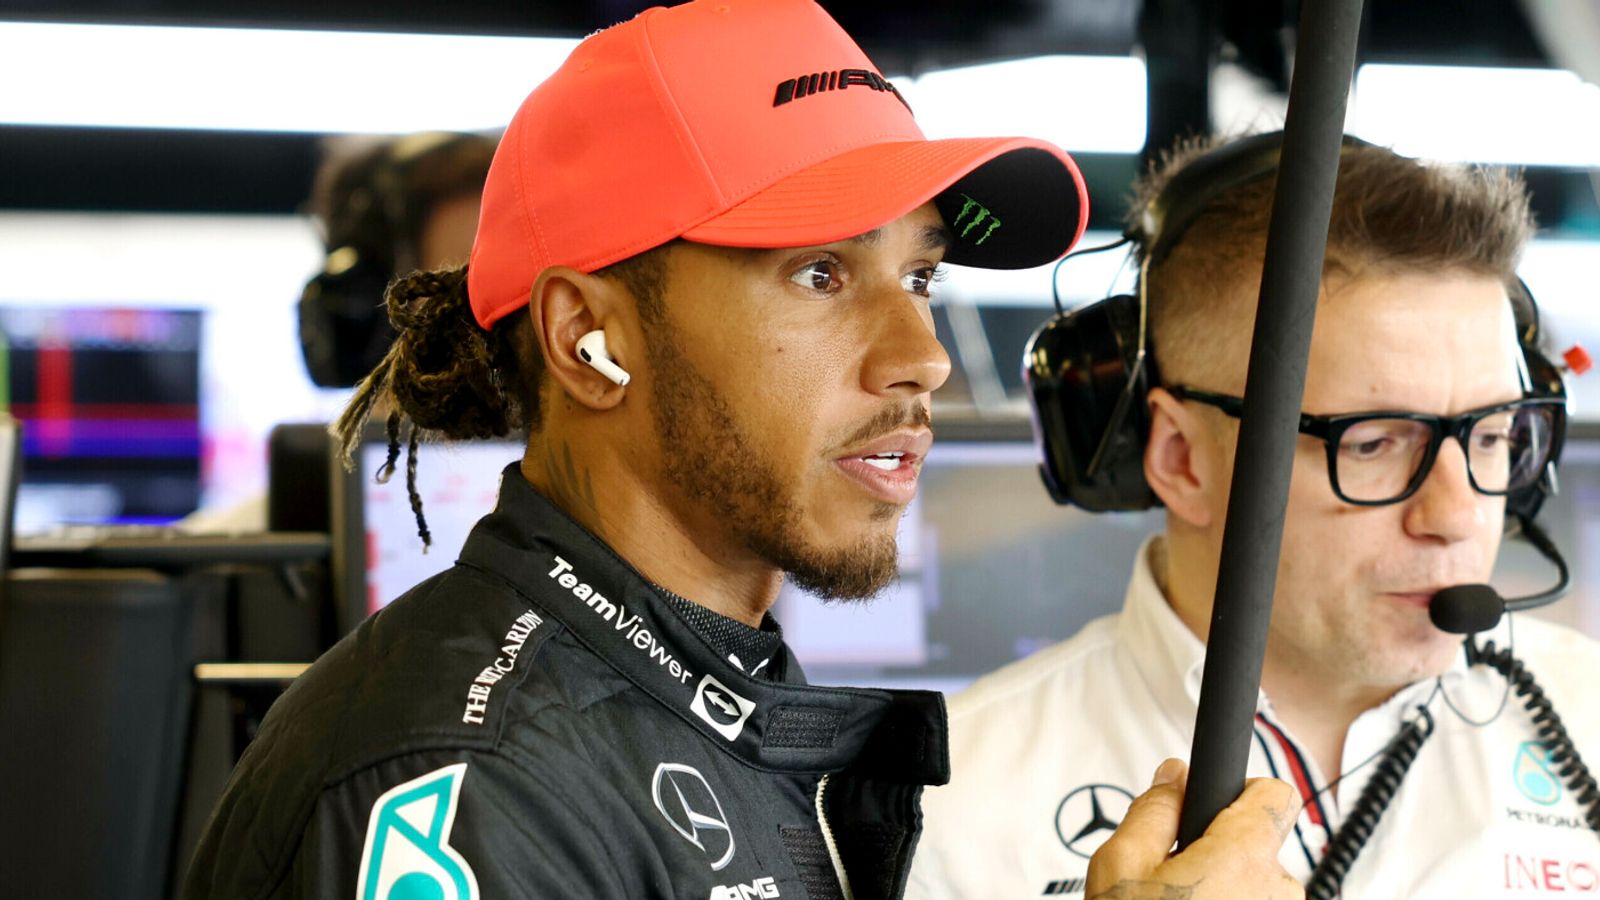 abu-dhabi-gp-lewis-hamilton-surprised-by-mercedes-lack-of-pace-during-qualifying